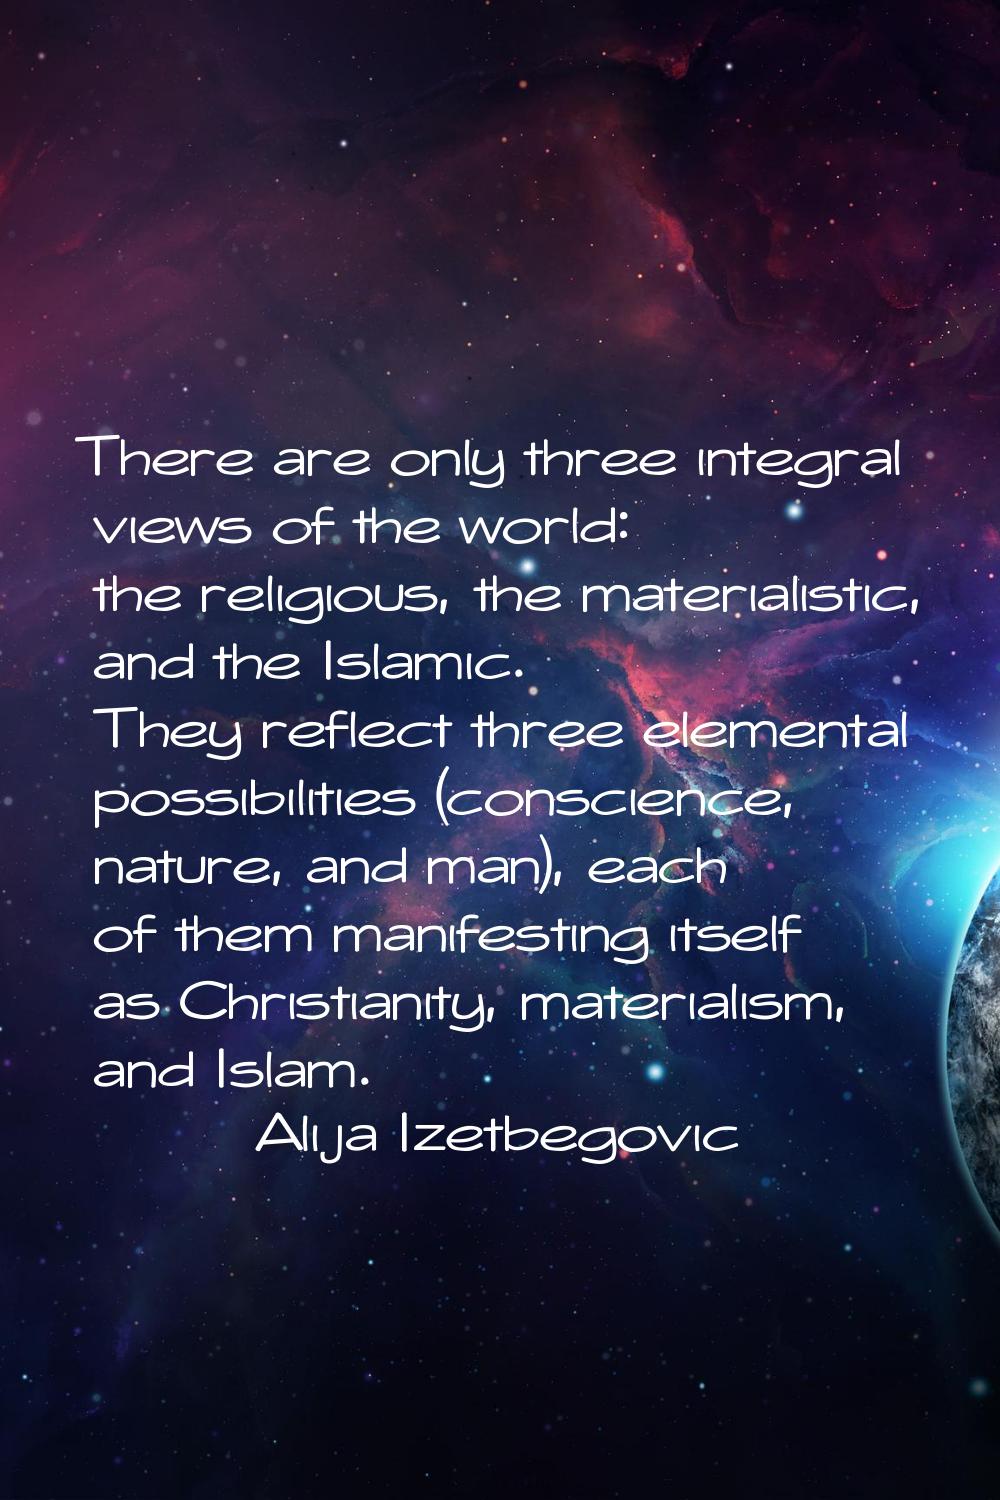 There are only three integral views of the world: the religious, the materialistic, and the Islamic